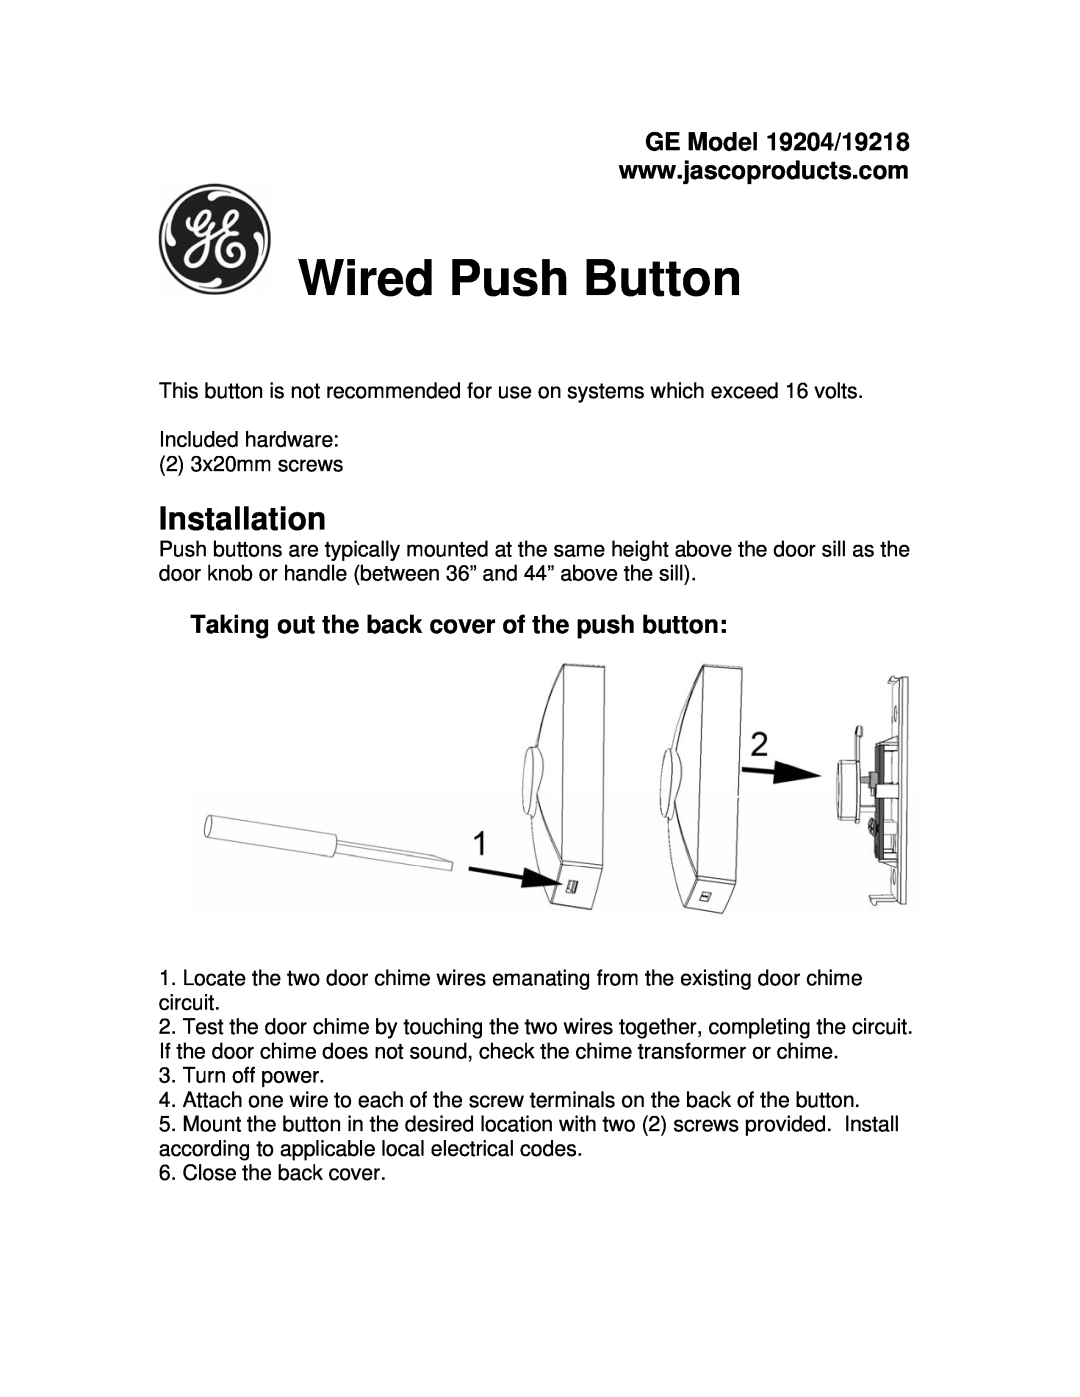 GE manual Wired Push Button, Installation, GE Model 19204/19218, Taking out the back cover of the push button 